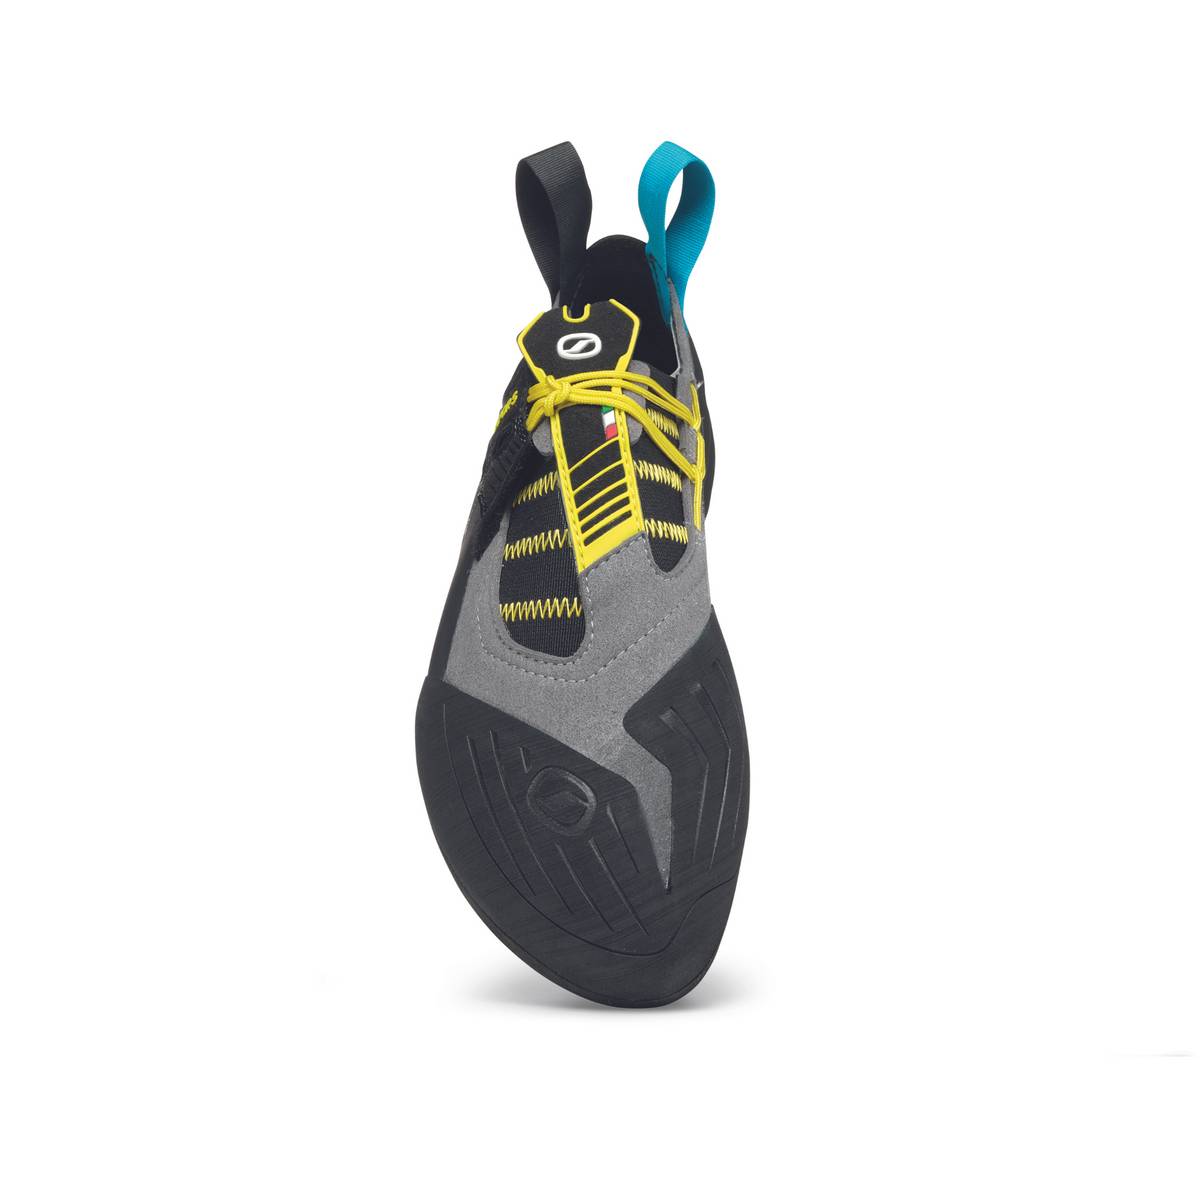 Scarpa Vapour S in smoke-grey with yellow trim. image showing upper of the foot  with removable strap